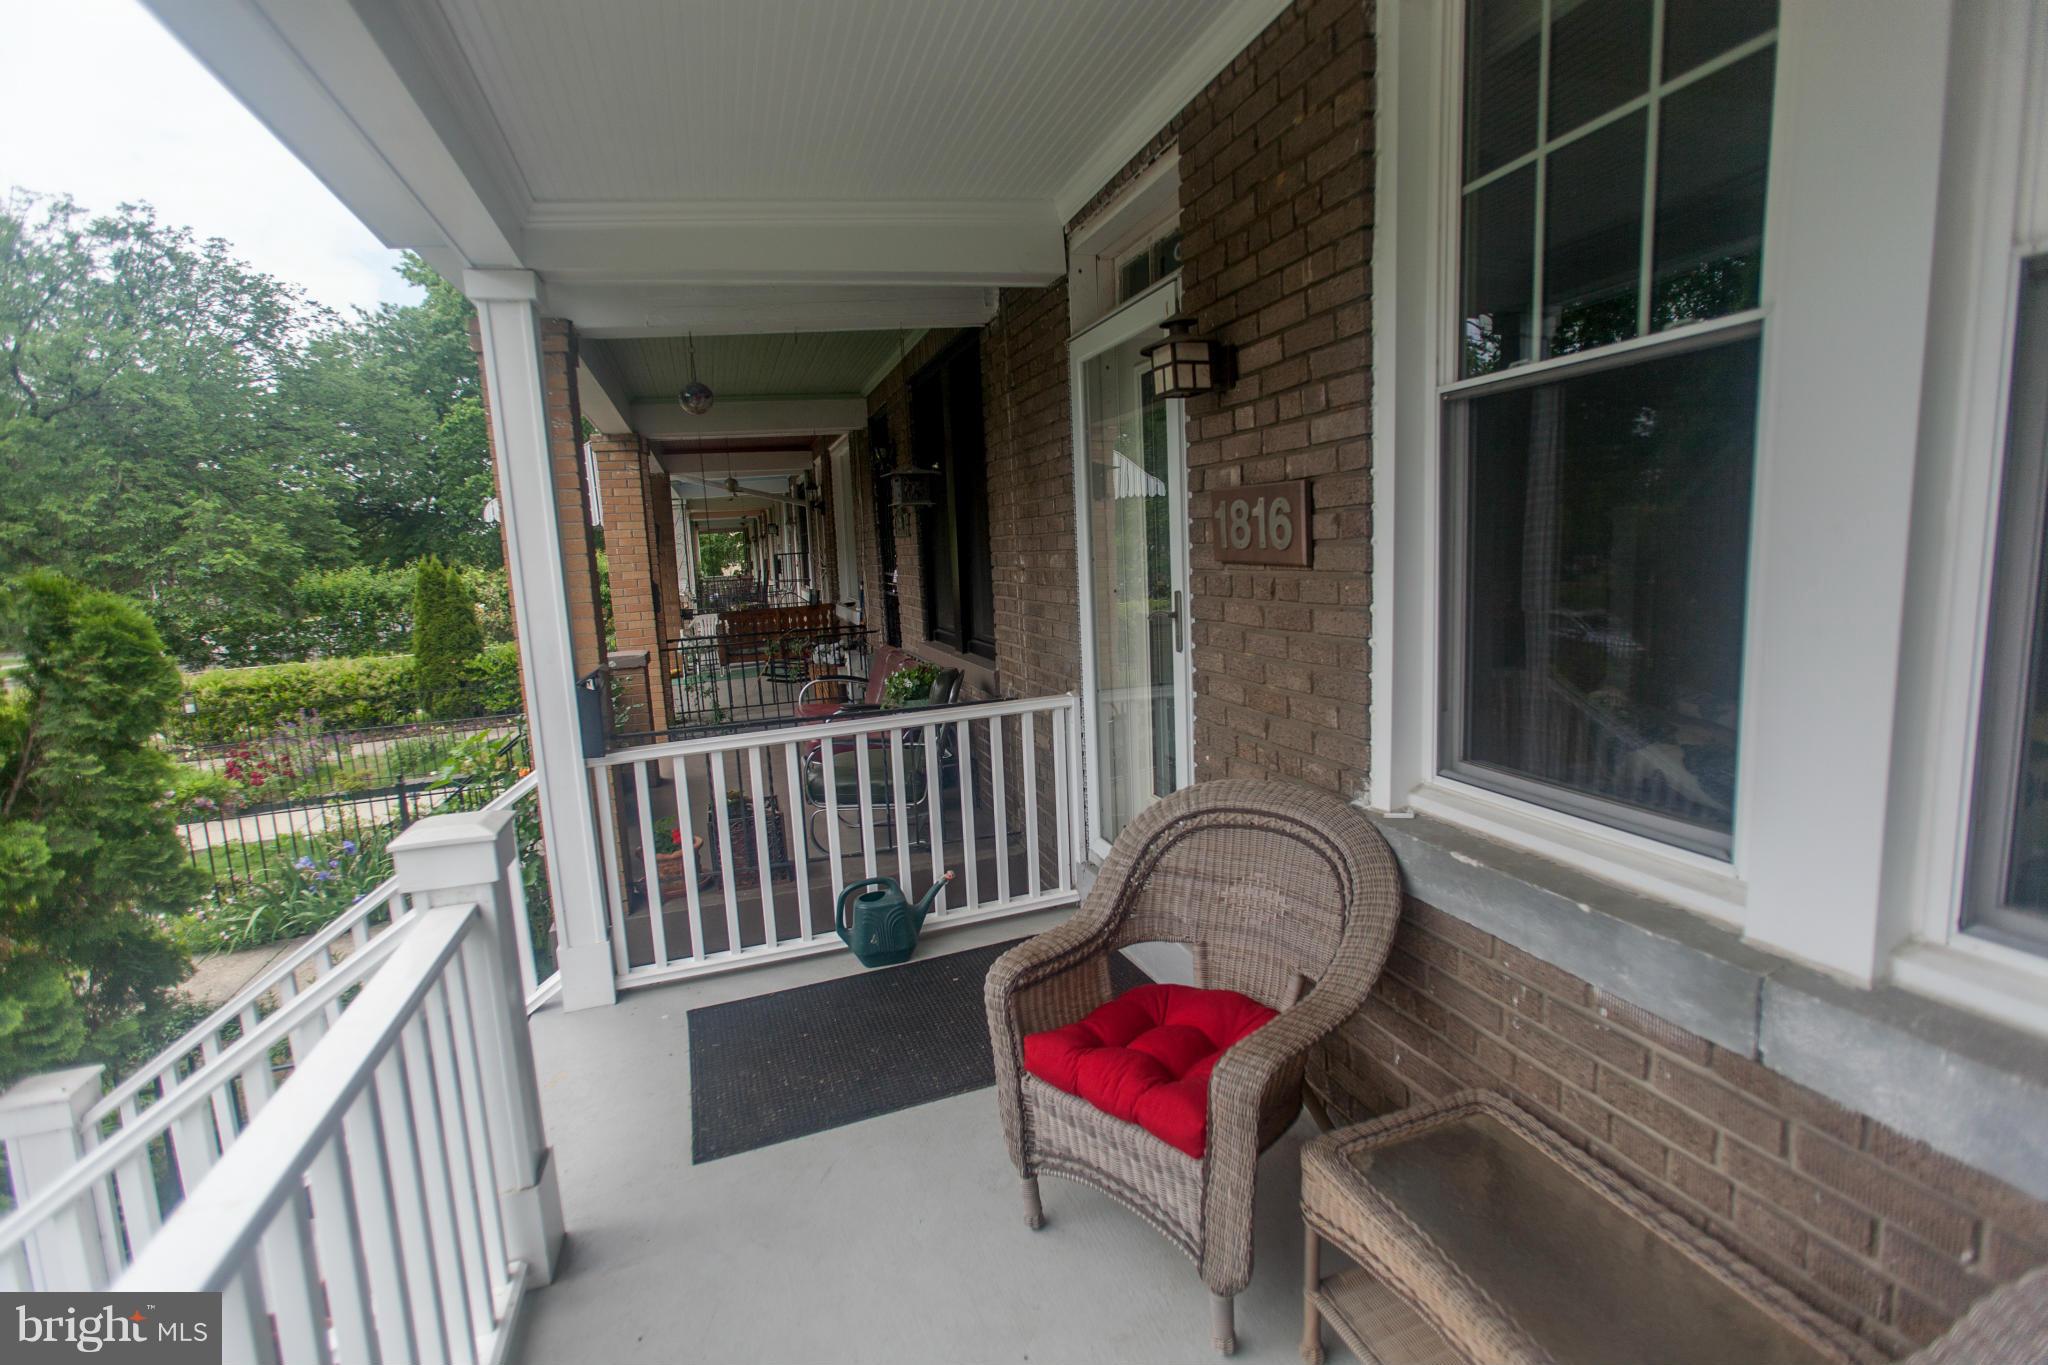 a view of a balcony with chair and wooden floor